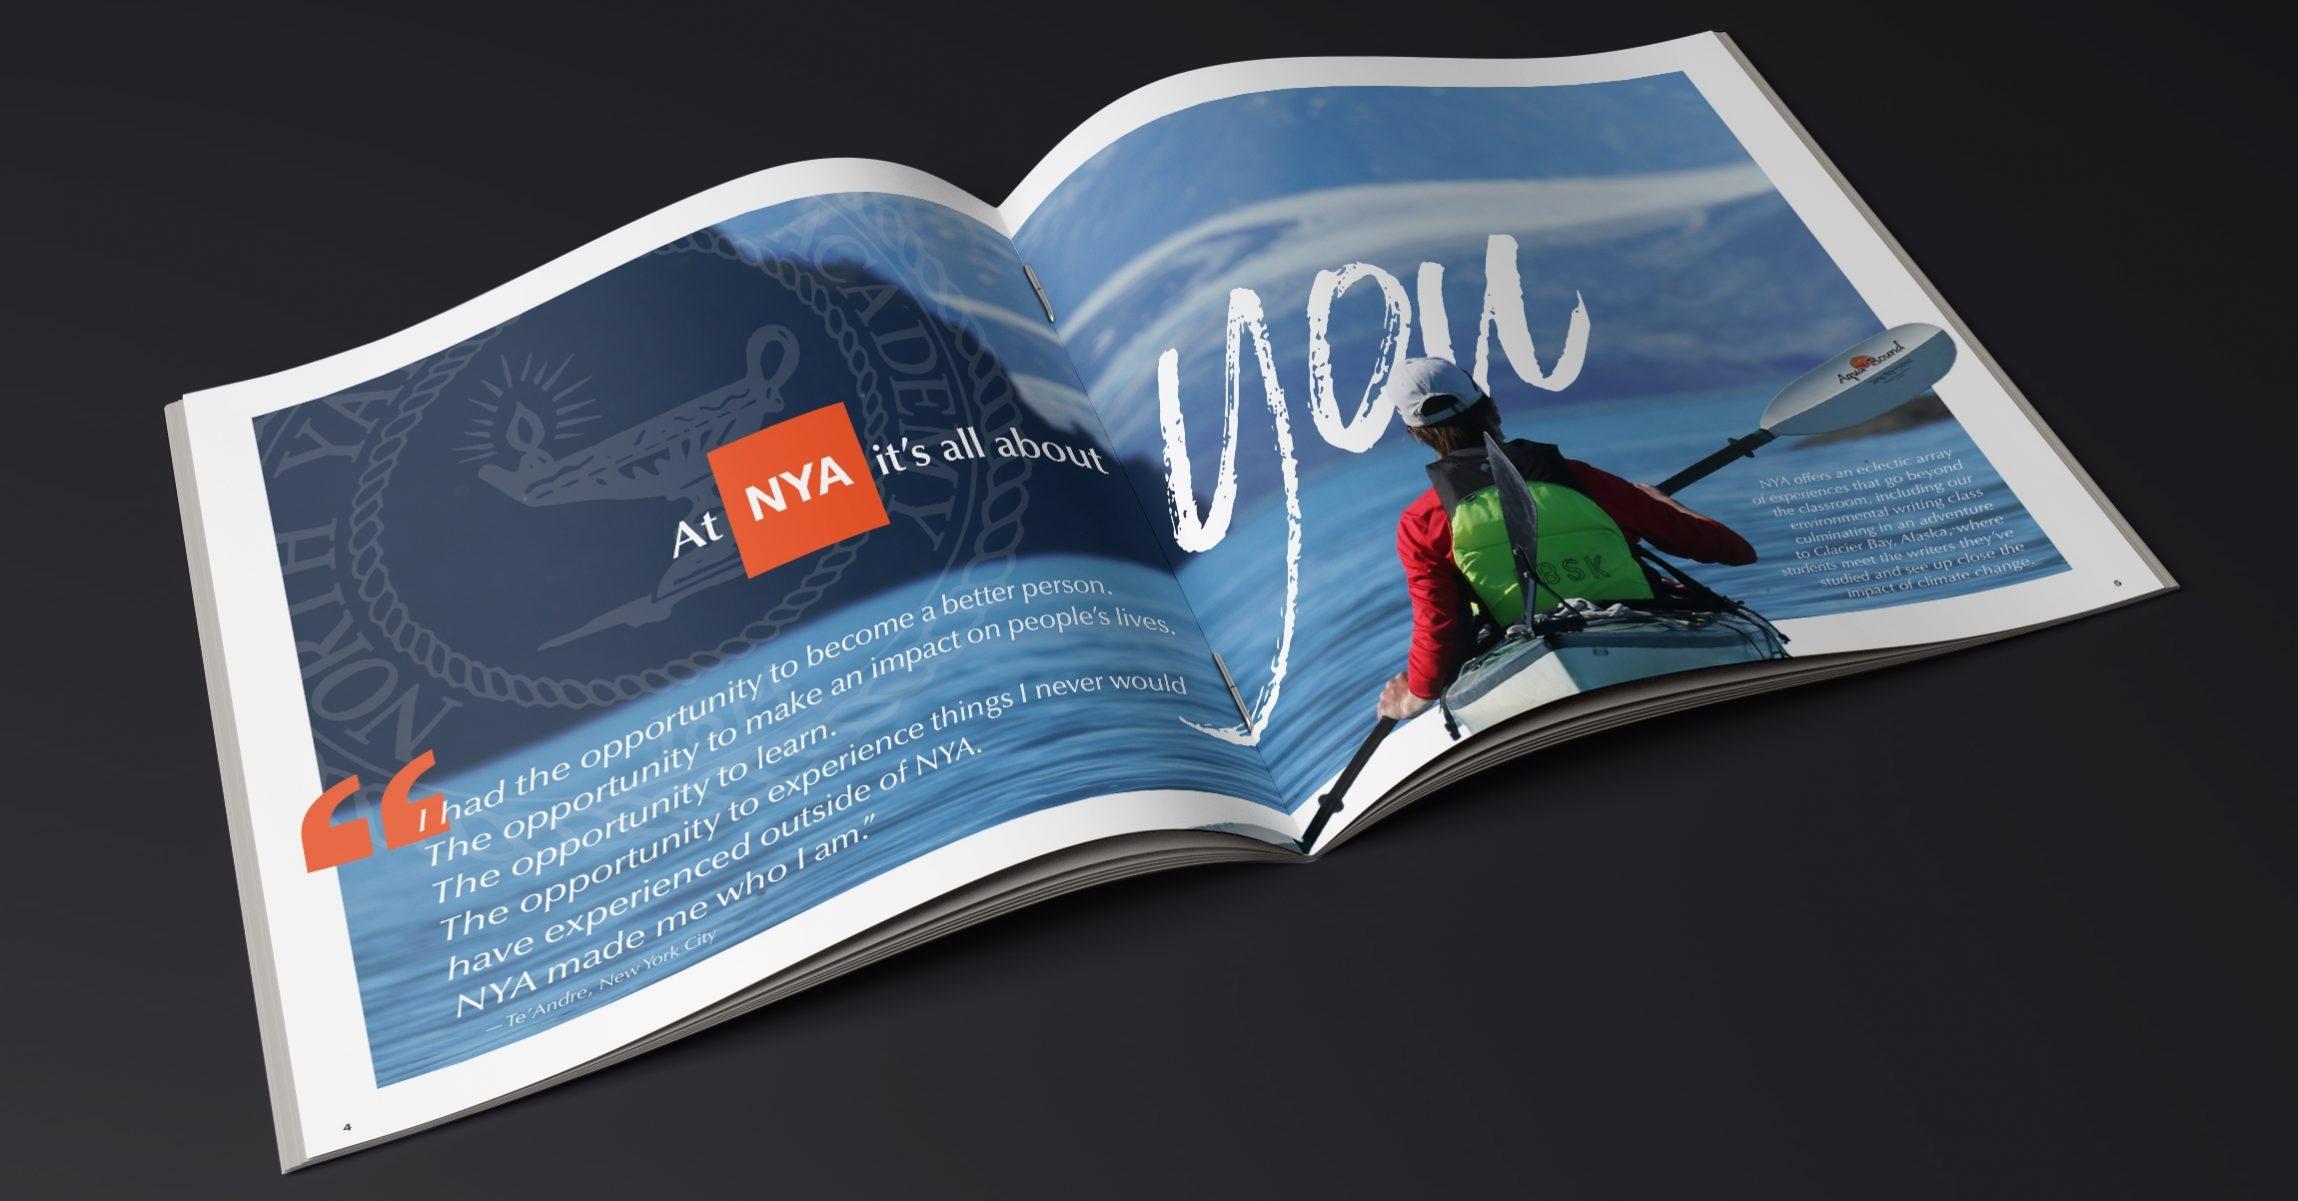 2021 NYA Viewbook Mockup Sea kayak background with text At NYA it's all about you